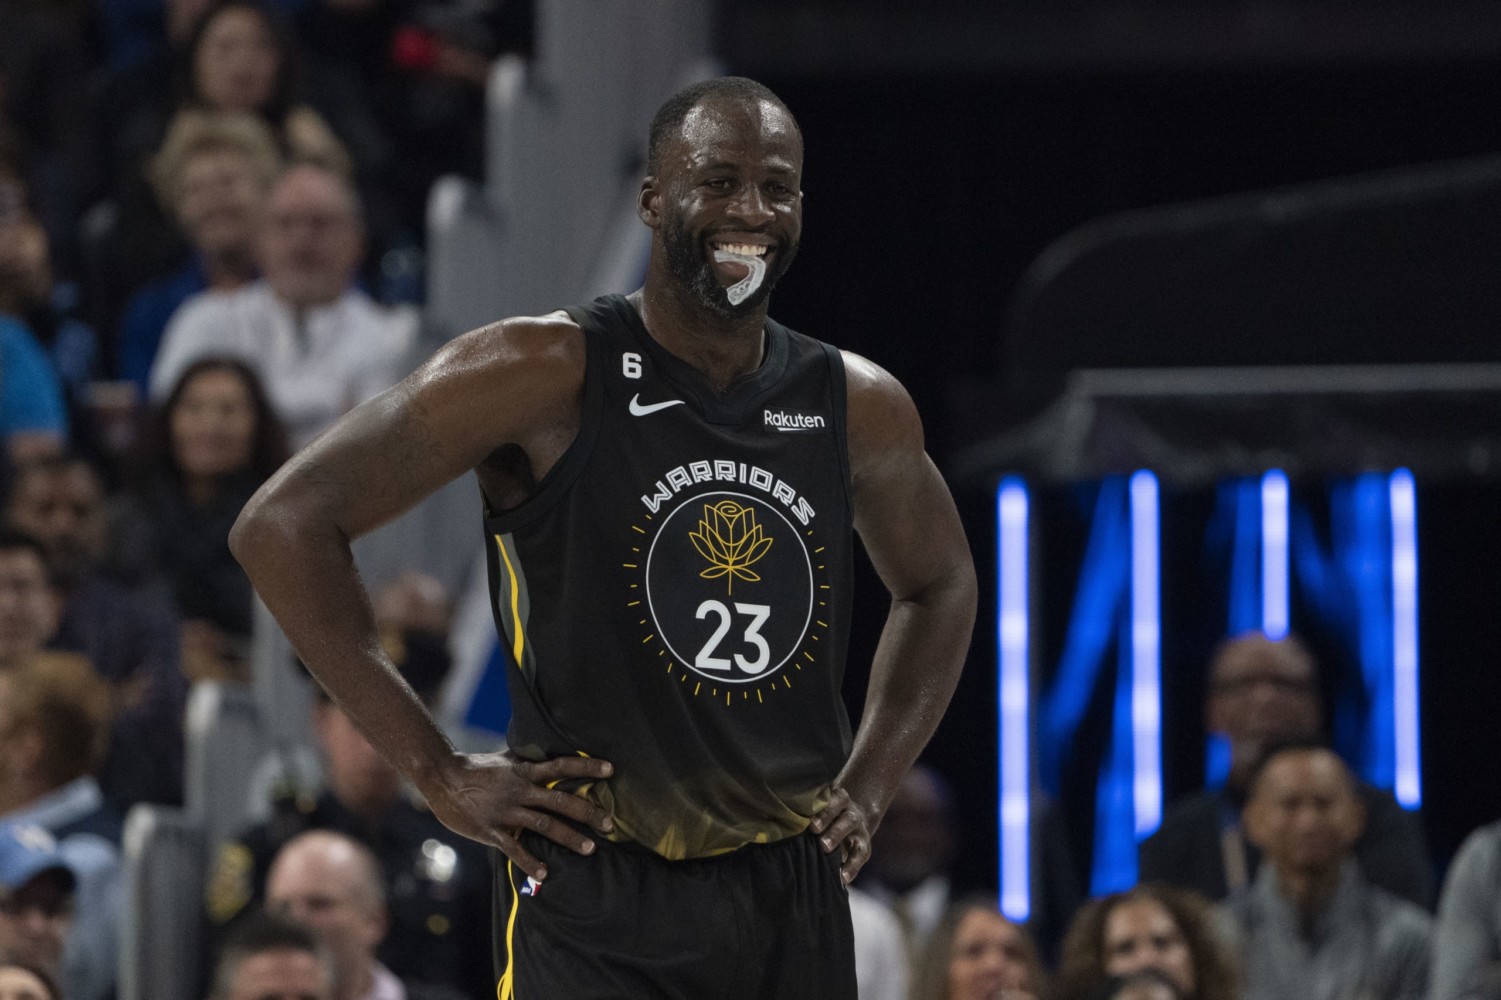 Warriors player Draymond Green chewing mouthguard and standing with hands on hip during NBA game